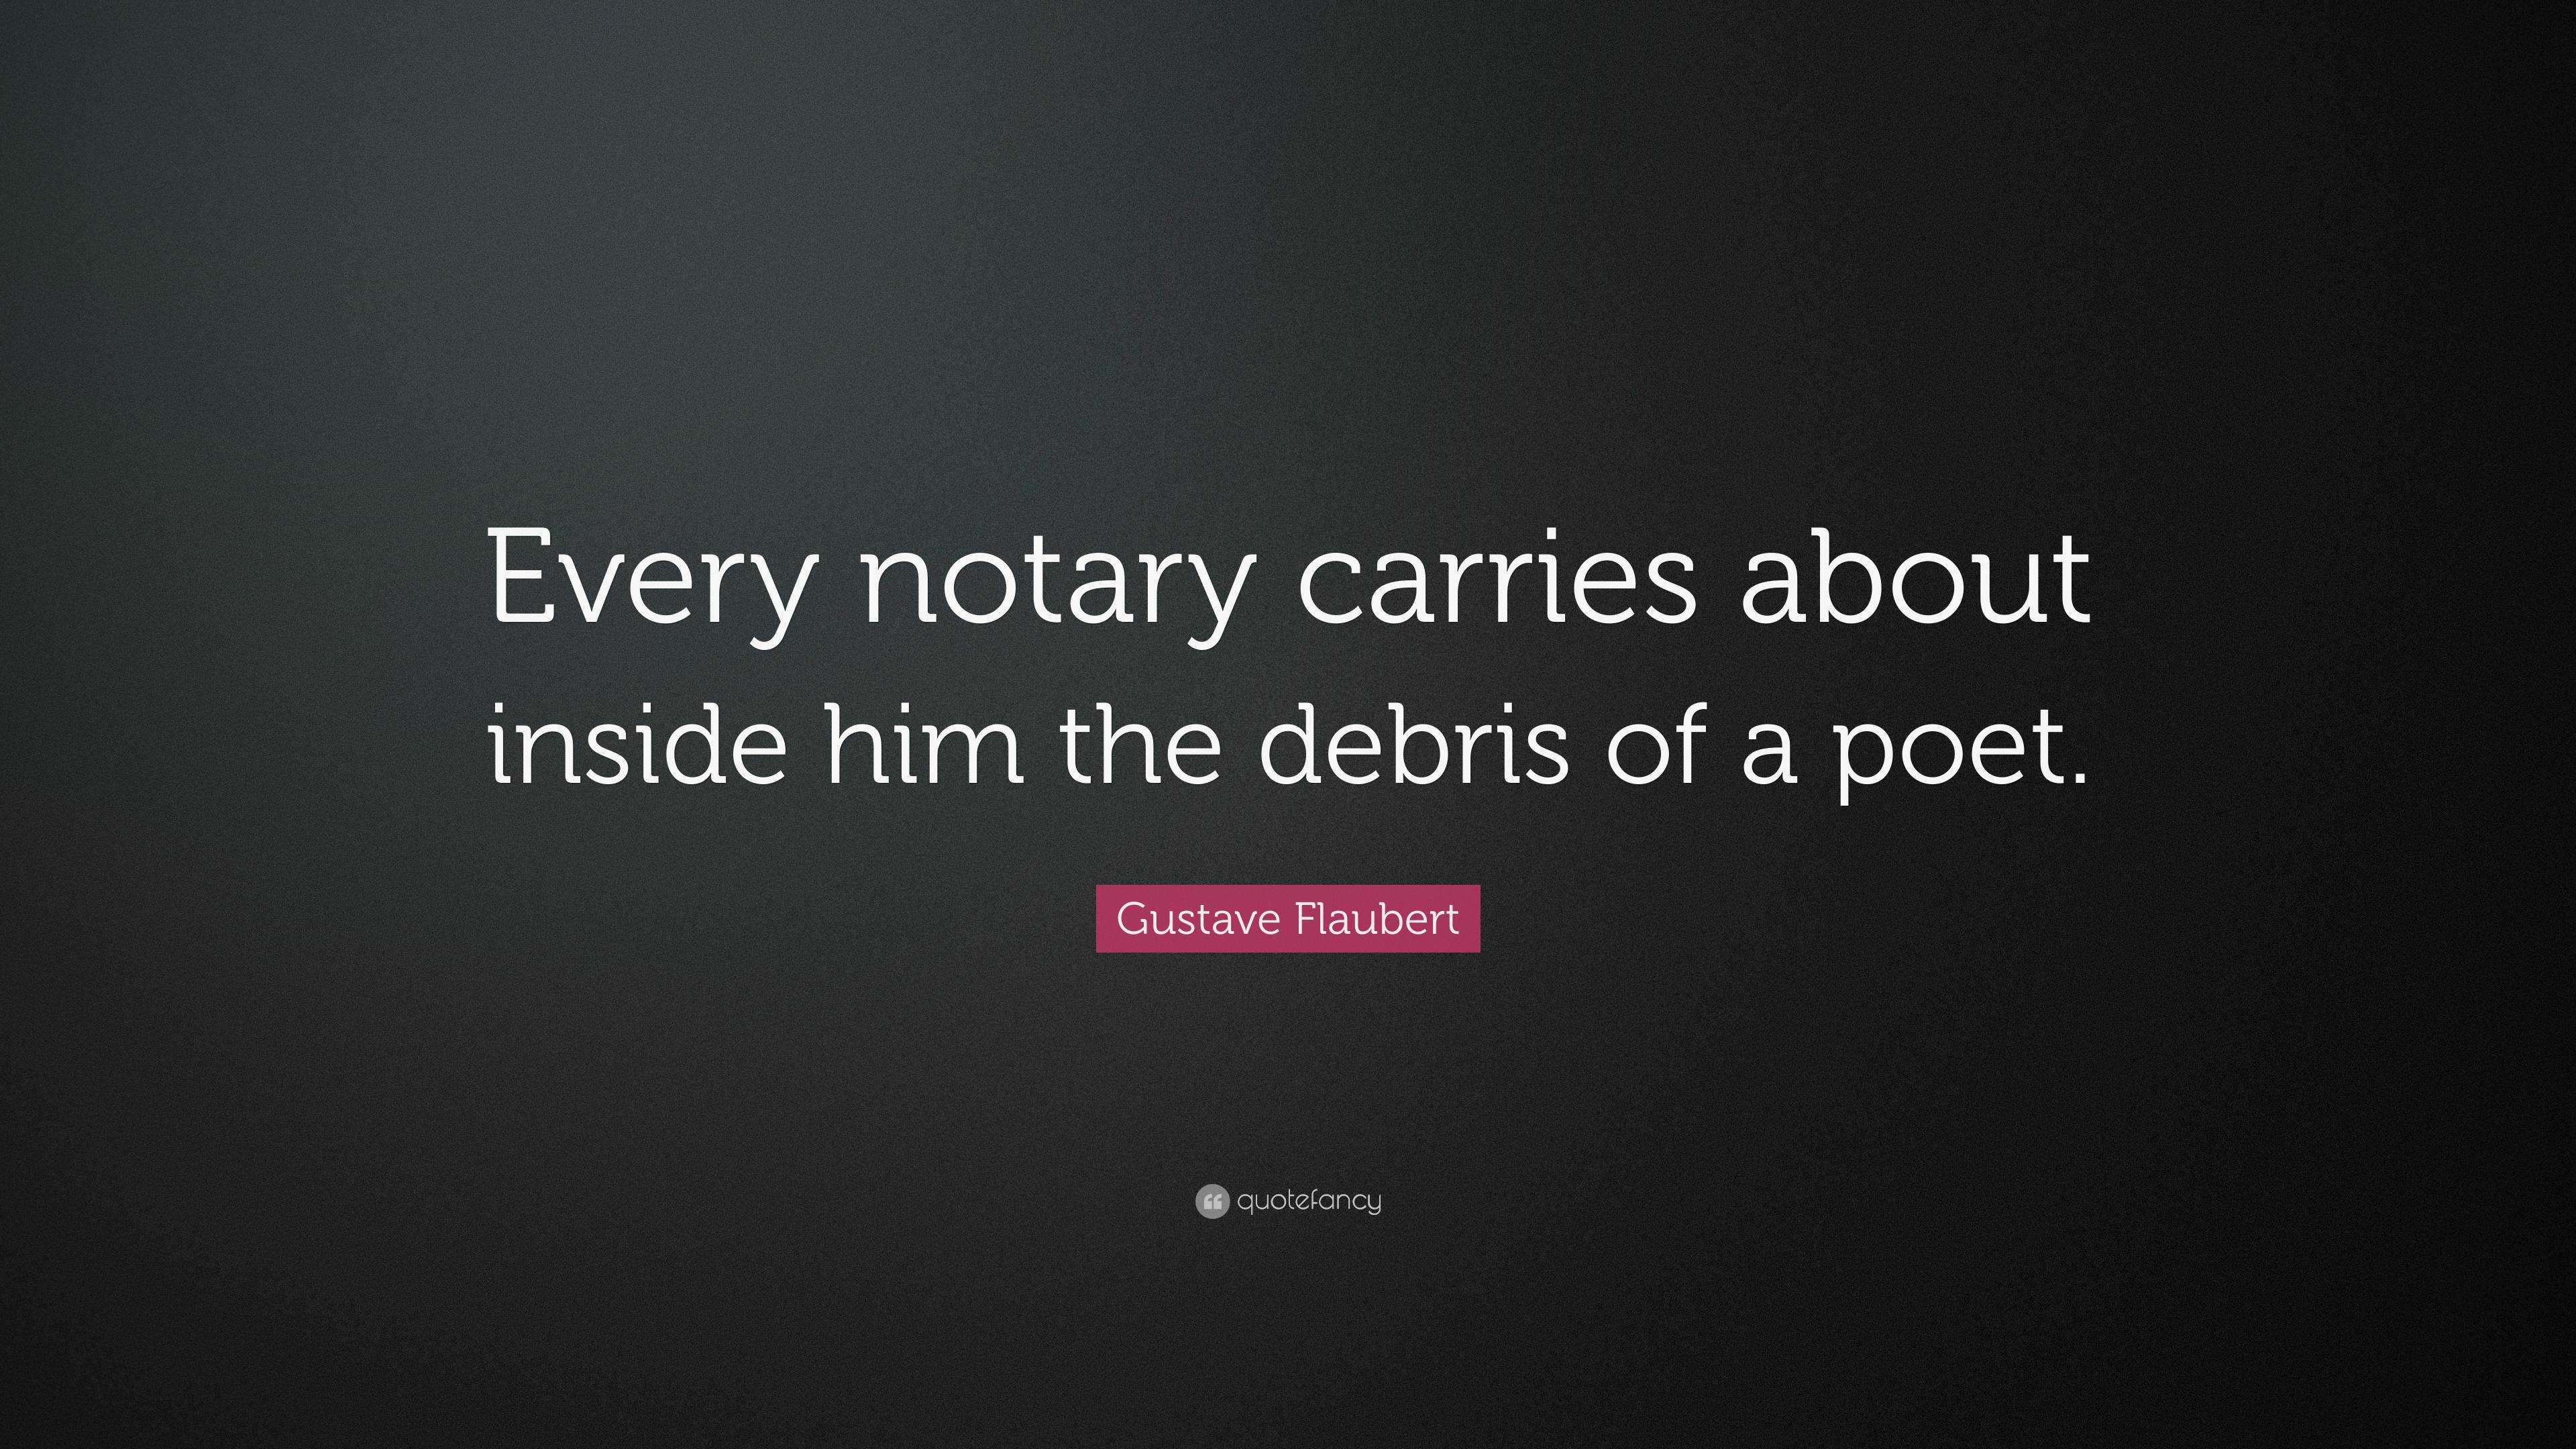 Gustave Flaubert Quote “Every notary carries about inside him the